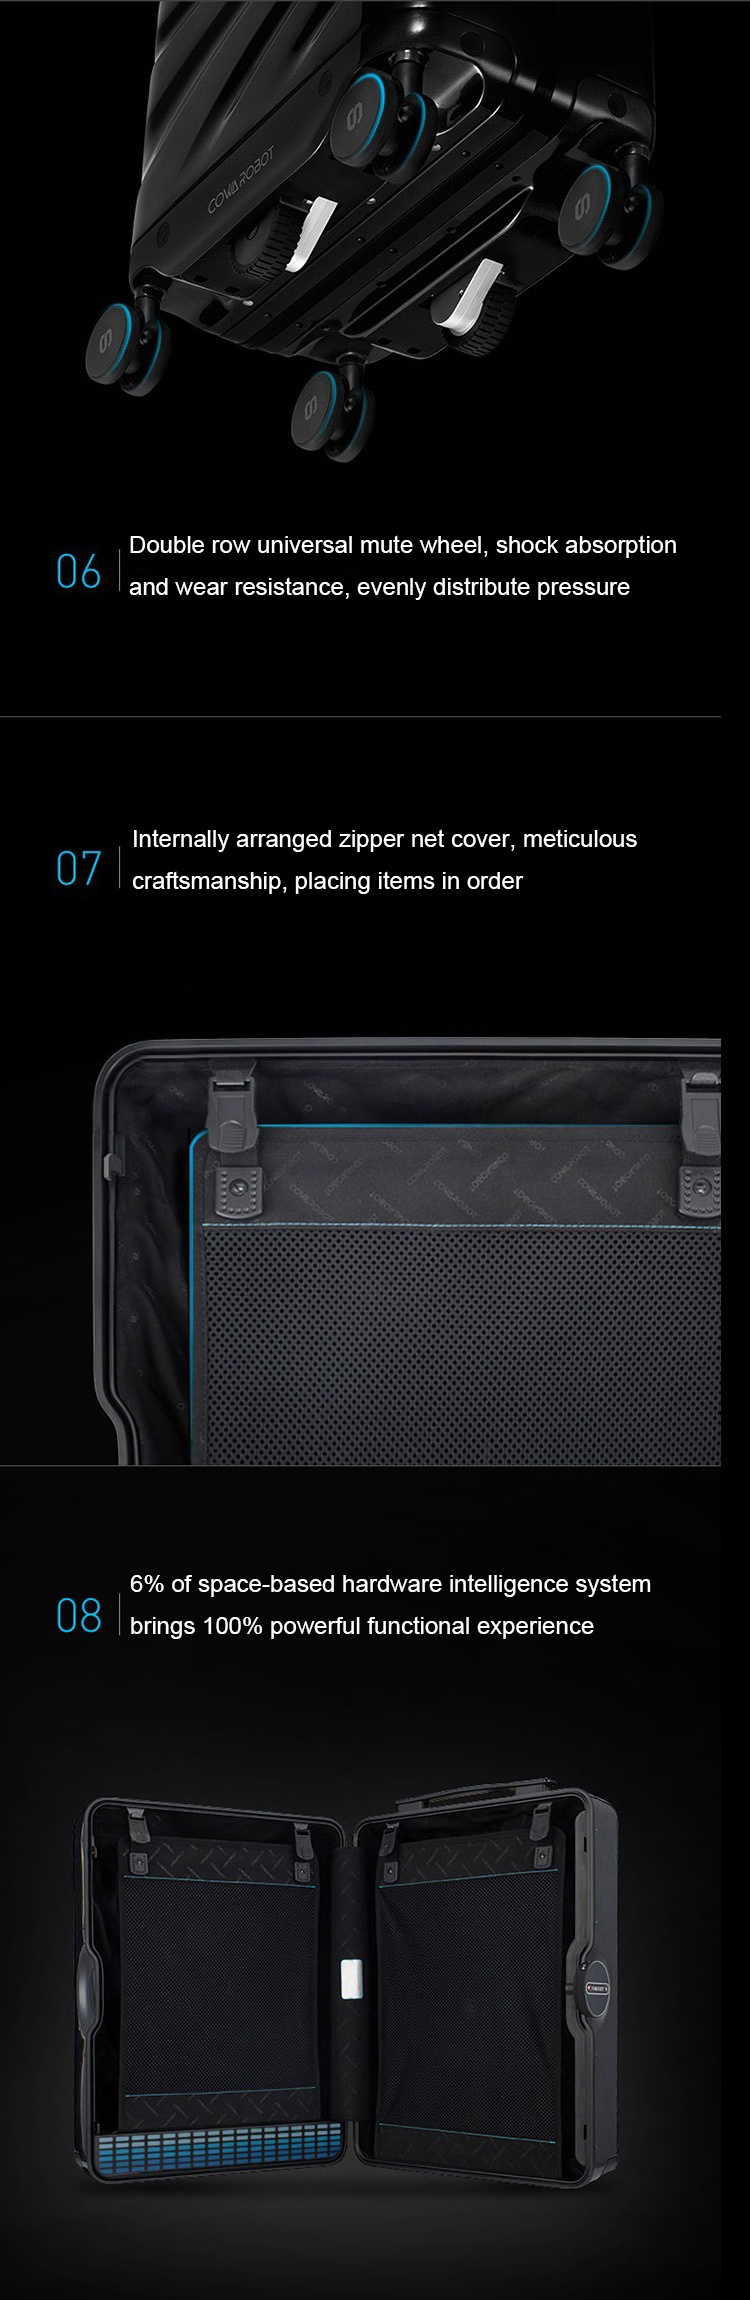 Ins Hot Xiaomi Smart Luggage Cool Wow Cowarobot Automatic Follow Trolley Case BSCI CNAS Carry on Luggage Smart Luggage